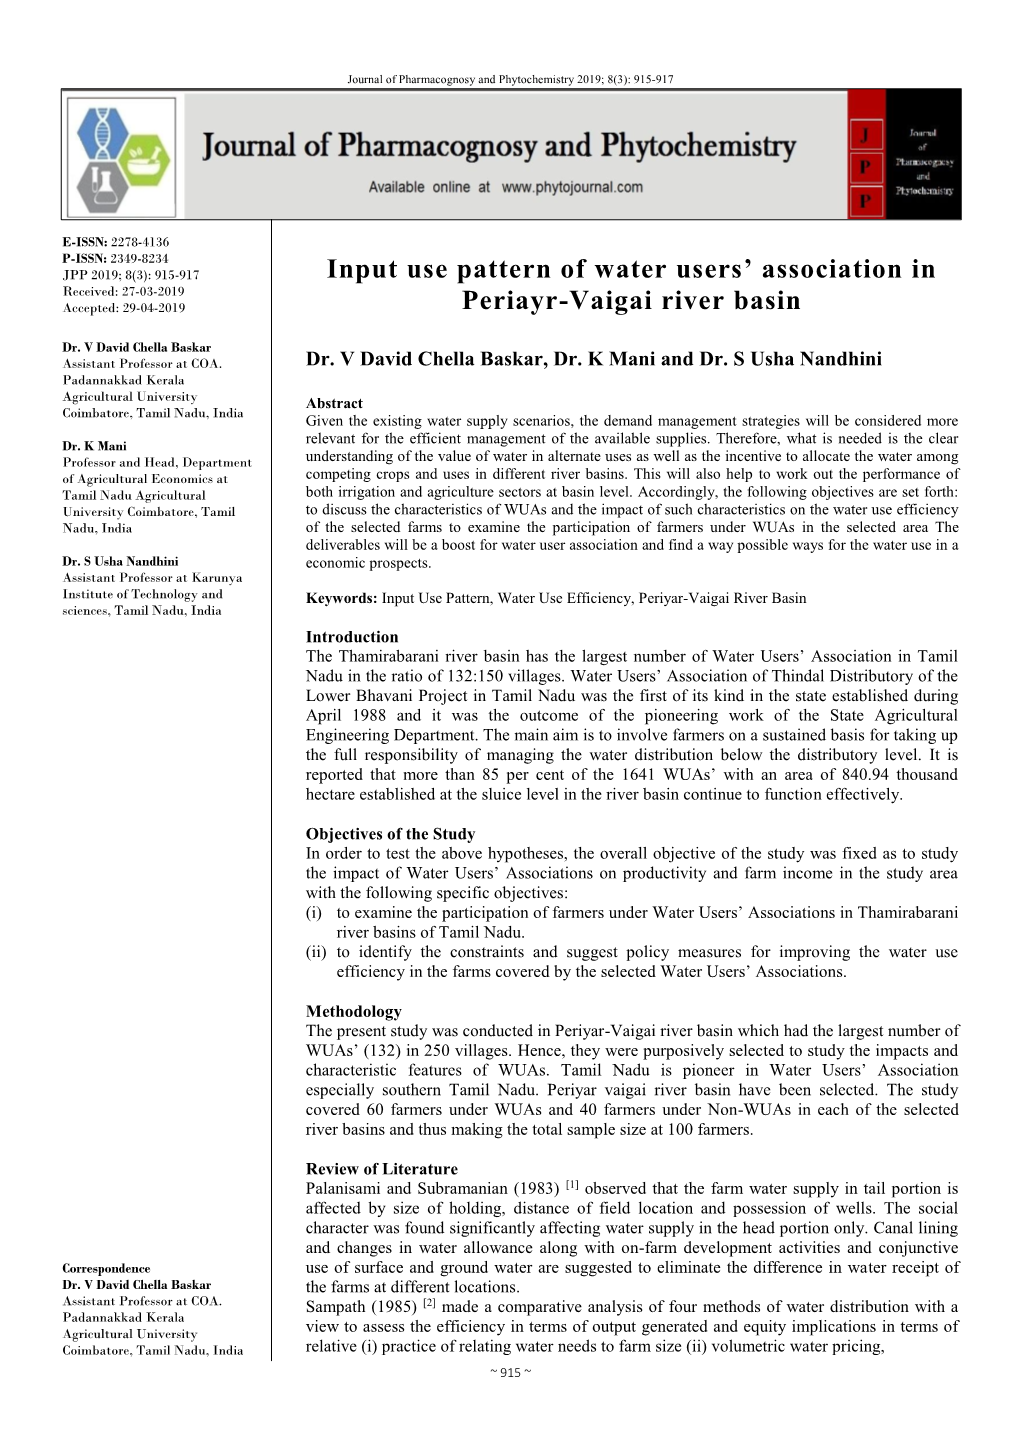 Input Use Pattern of Water Users' Association in Periayr-Vaigai River Basin